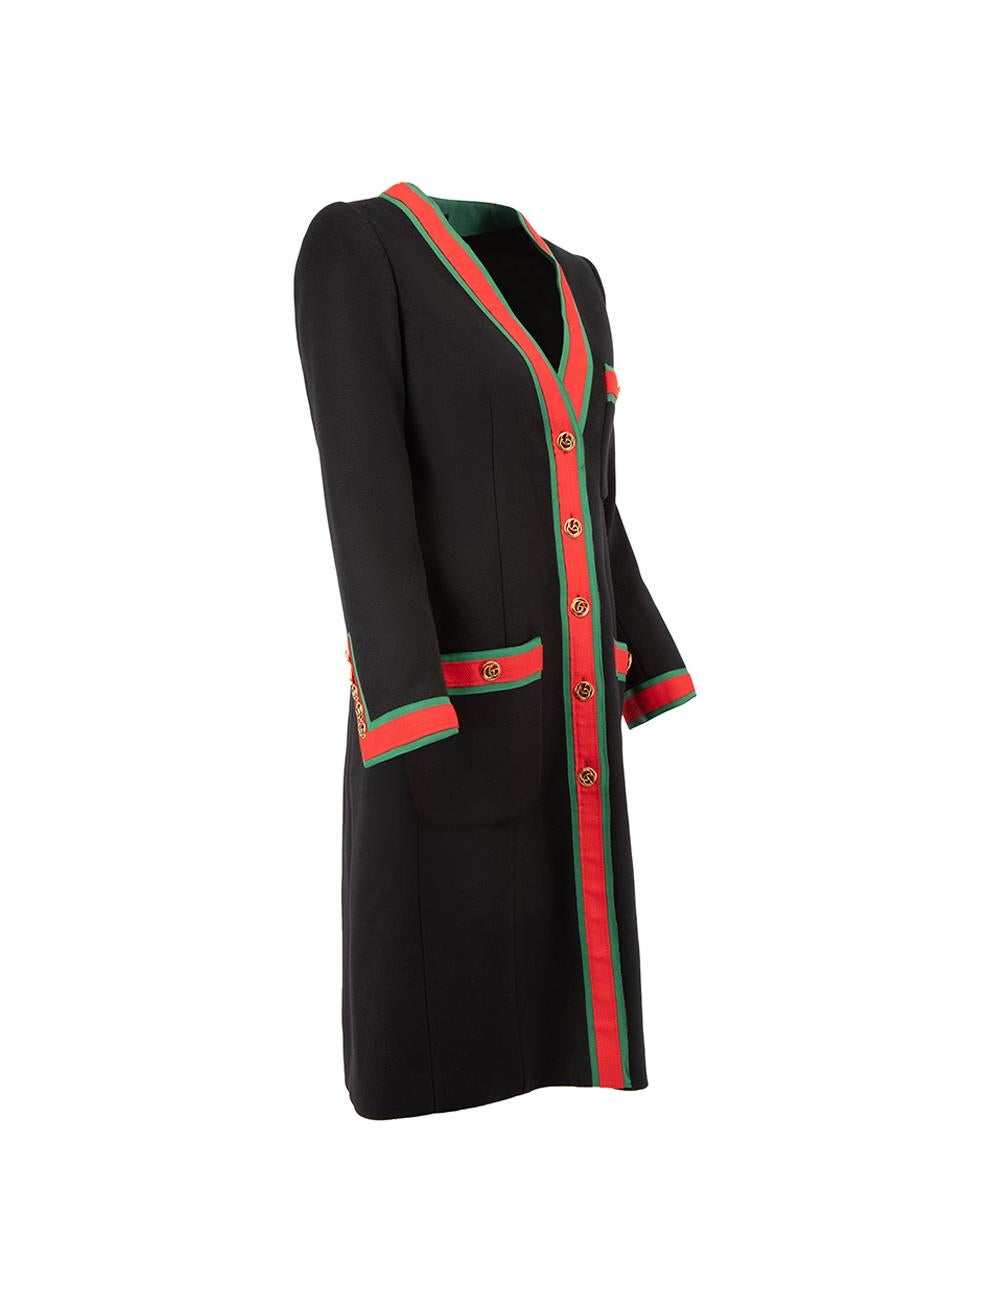 CONDITION is Very good. Minimal wear to coat is evident. Minimal wear to the red trim that goes down the middle where some loose thread can be seen on this used Gucci designer resale item. 
 
 Details
  Black
 Wool
 Long coat
 Single breasted with